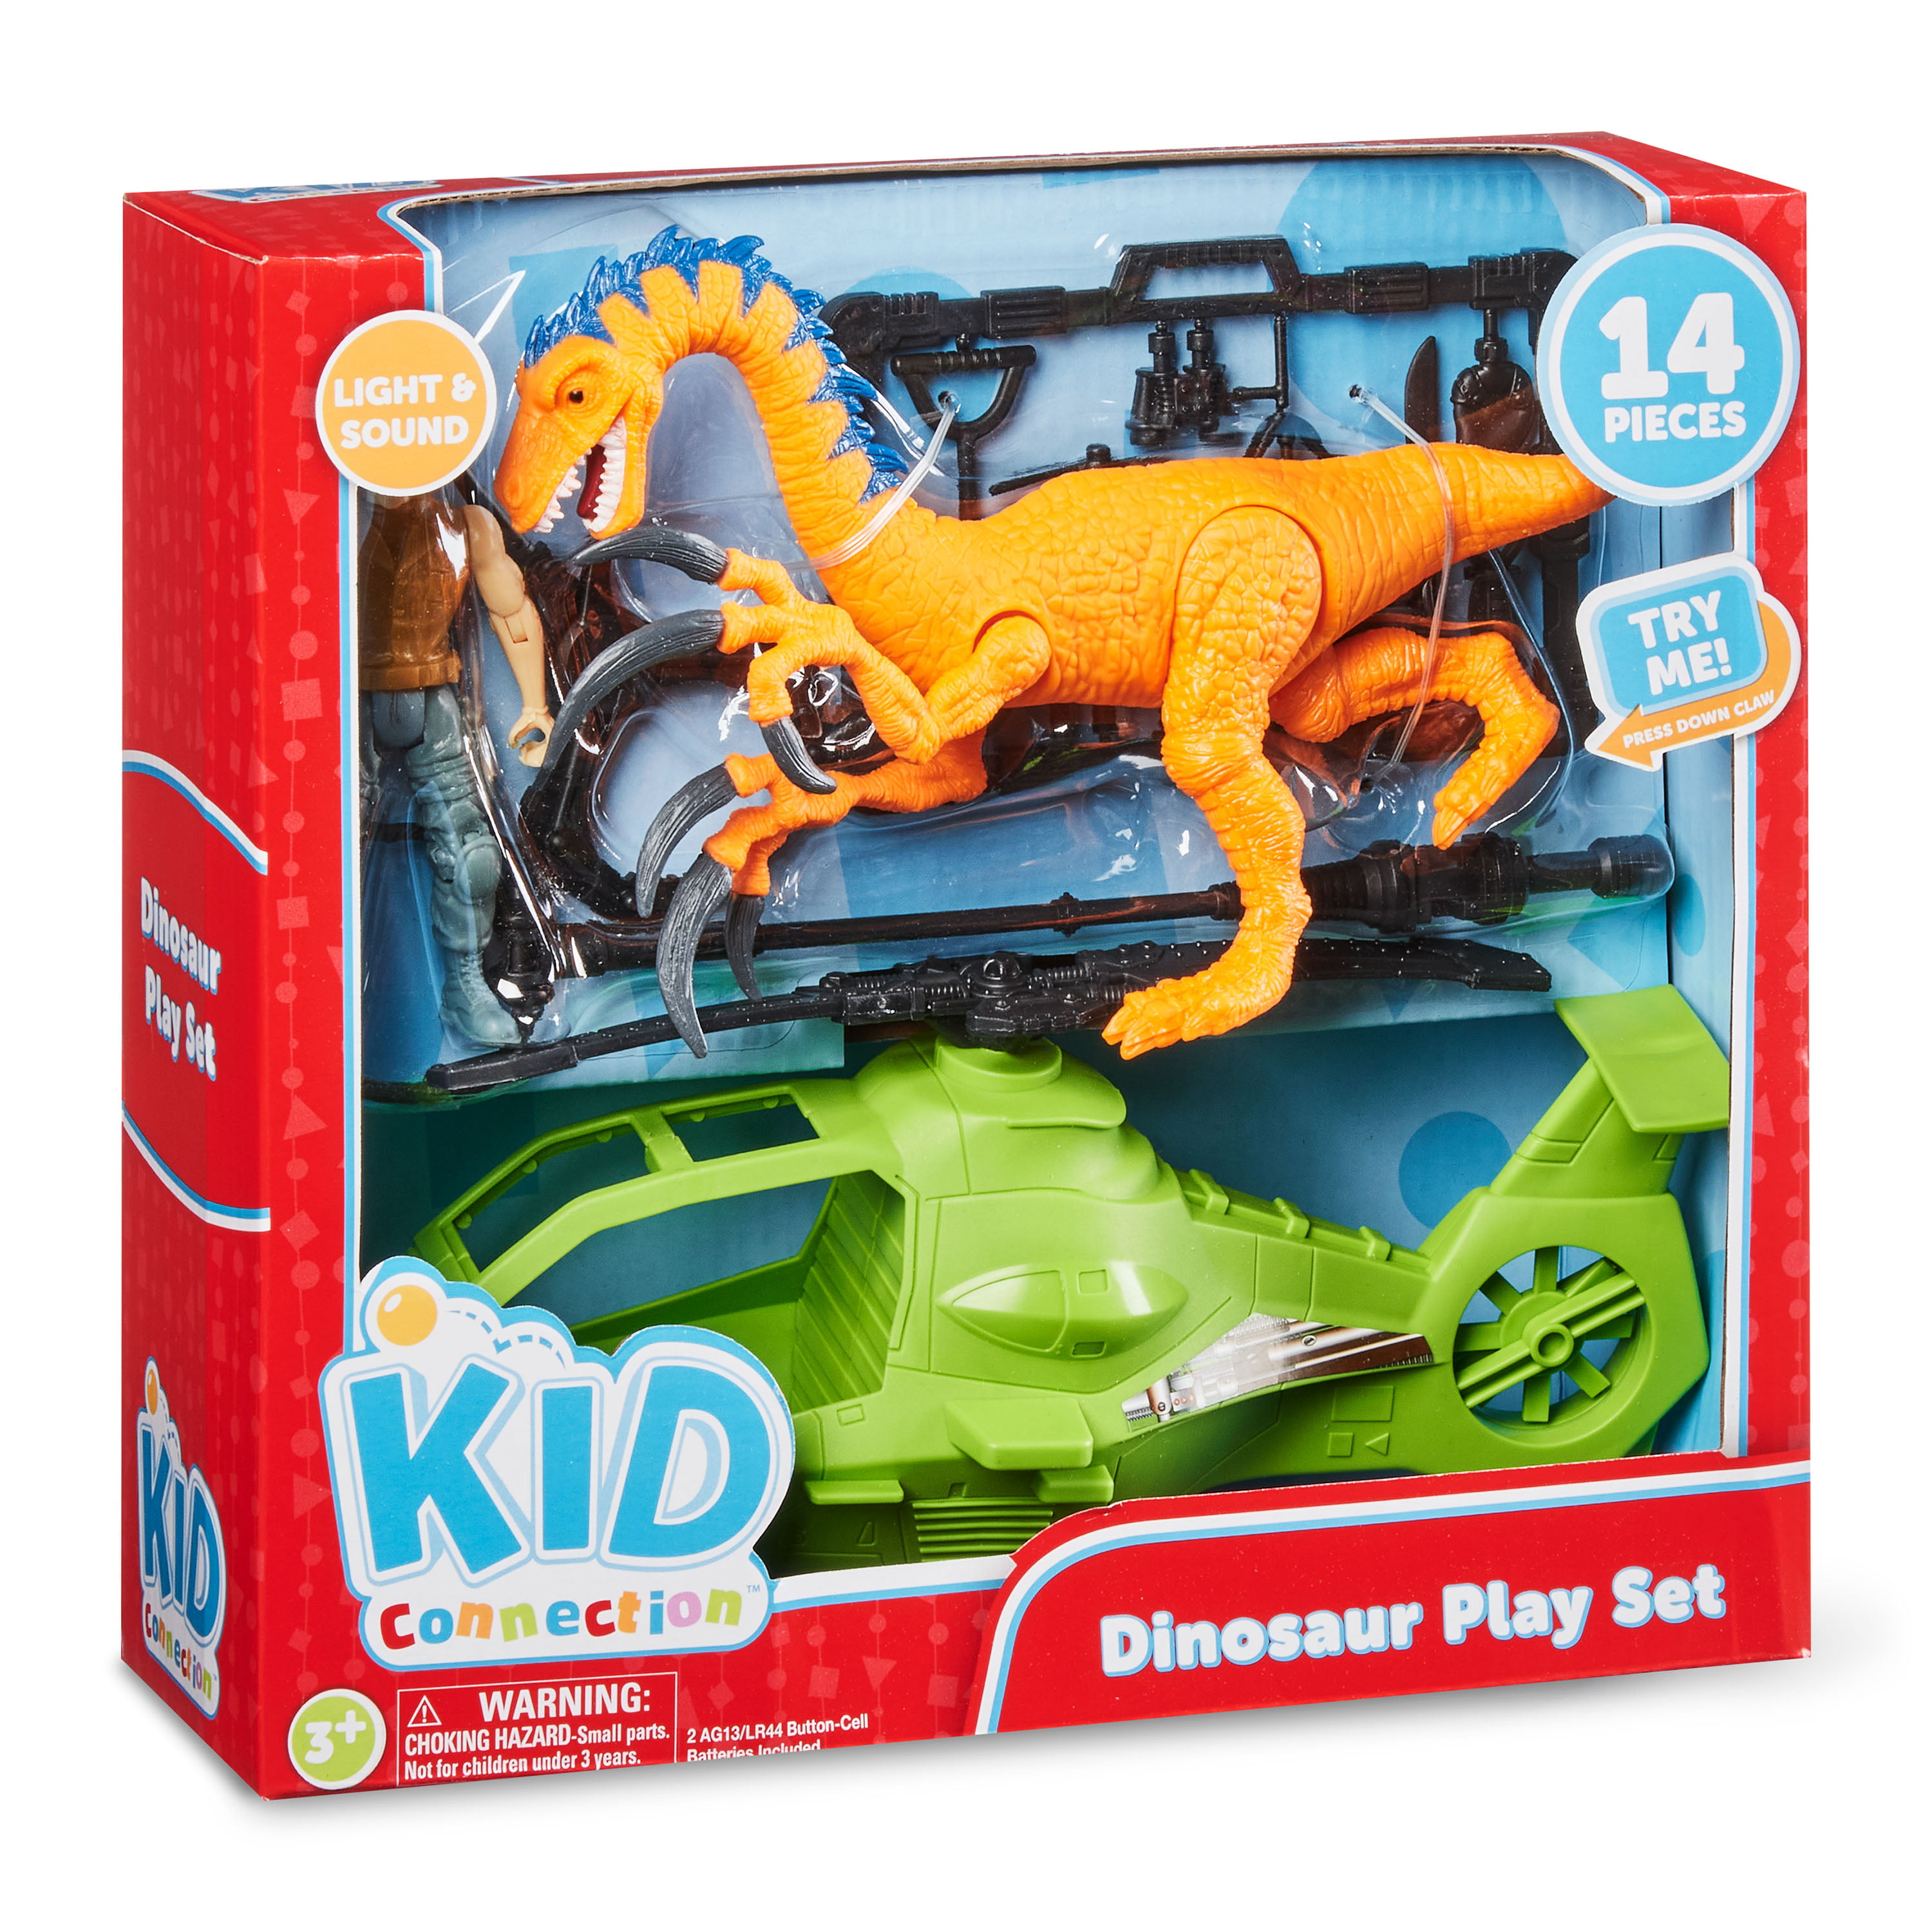 Kid Connection Dinosaur Play Set, 14 Pieces